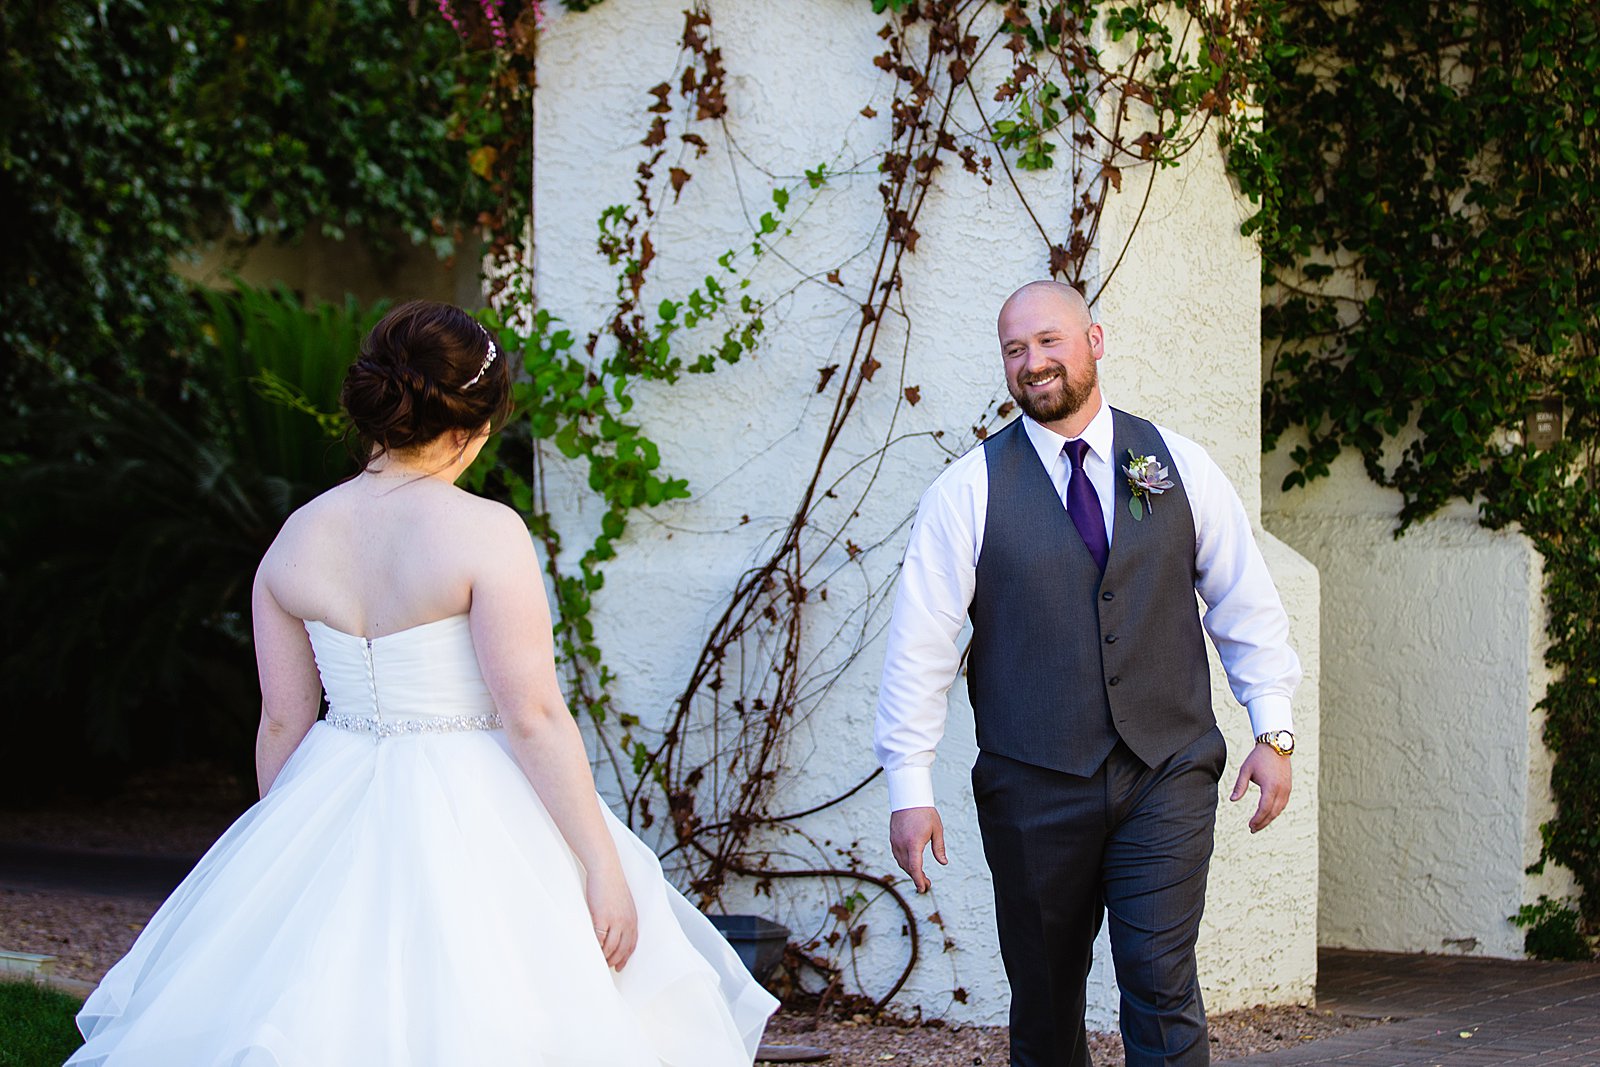 Bride and Groom's first look at Arizona Grand Resort by Phoenix wedding photographer PMA Photography.